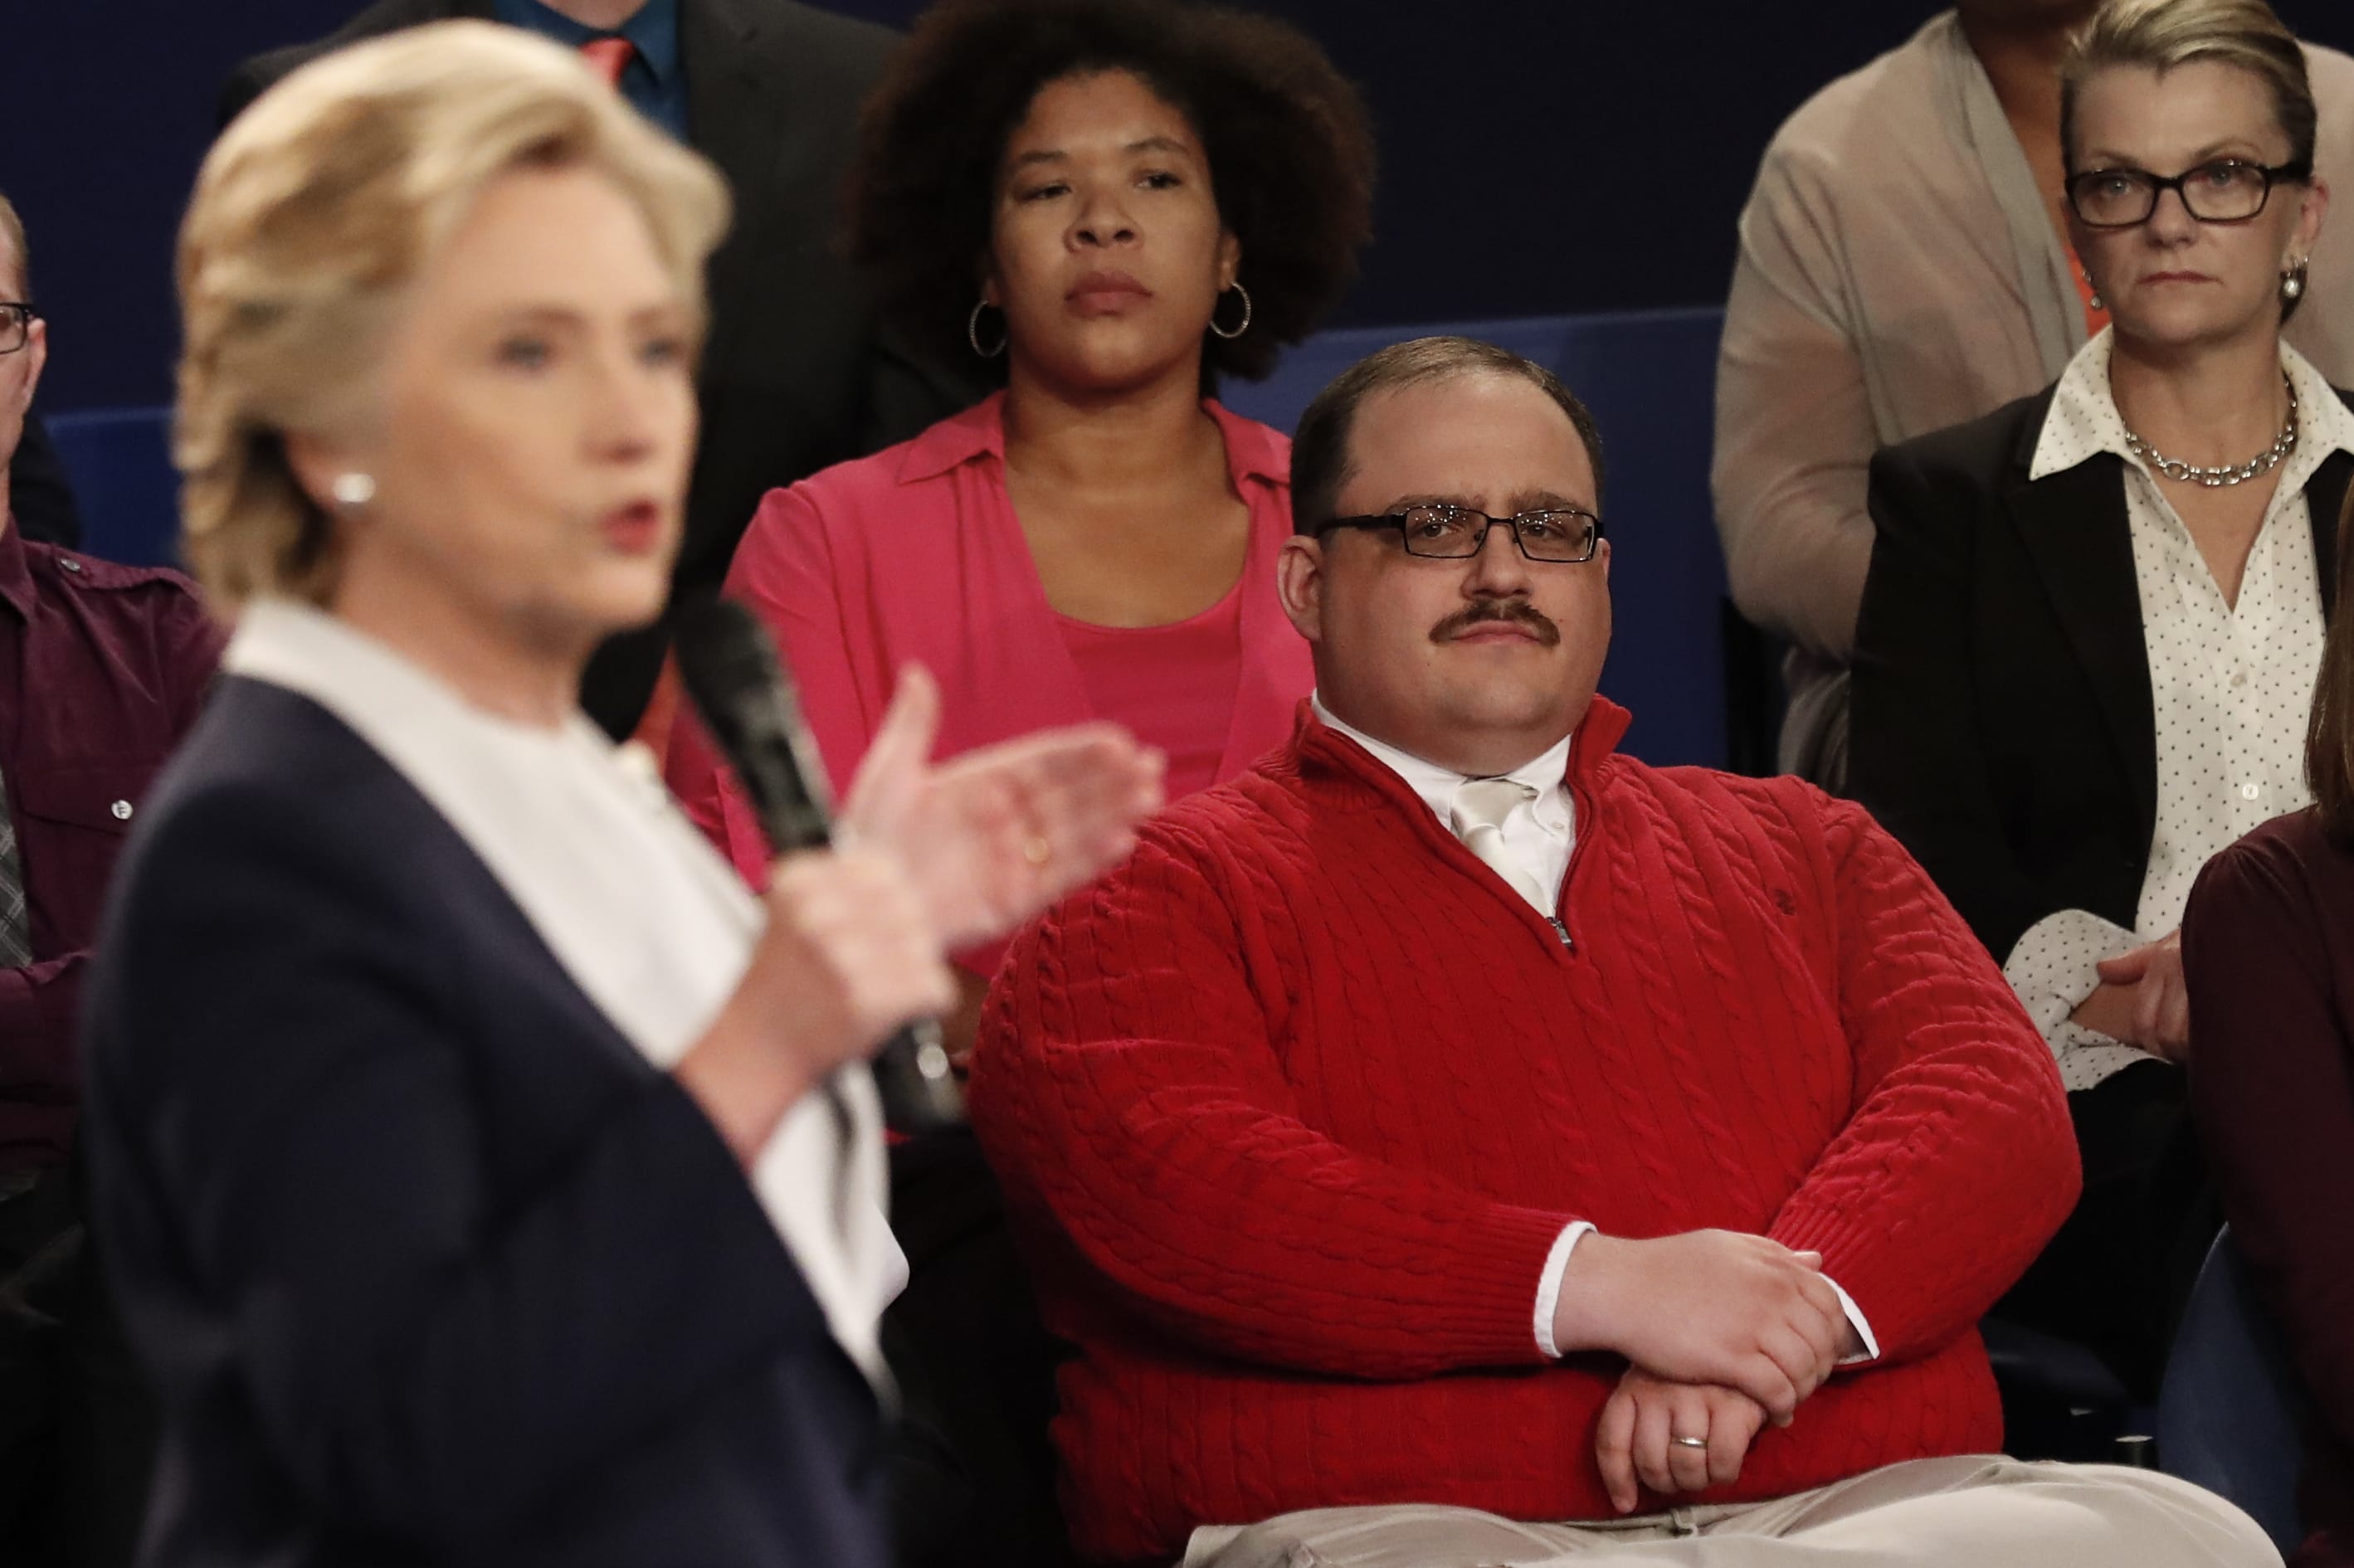 Kenneth Bone listens as Democratic presidential nominee Hillary Clinton answers a question during the second presidential debate with Republican presidential nominee Donald Trump at Washington University in St. Louis, Sunday, Oct. 9, 2016. (Rick T.